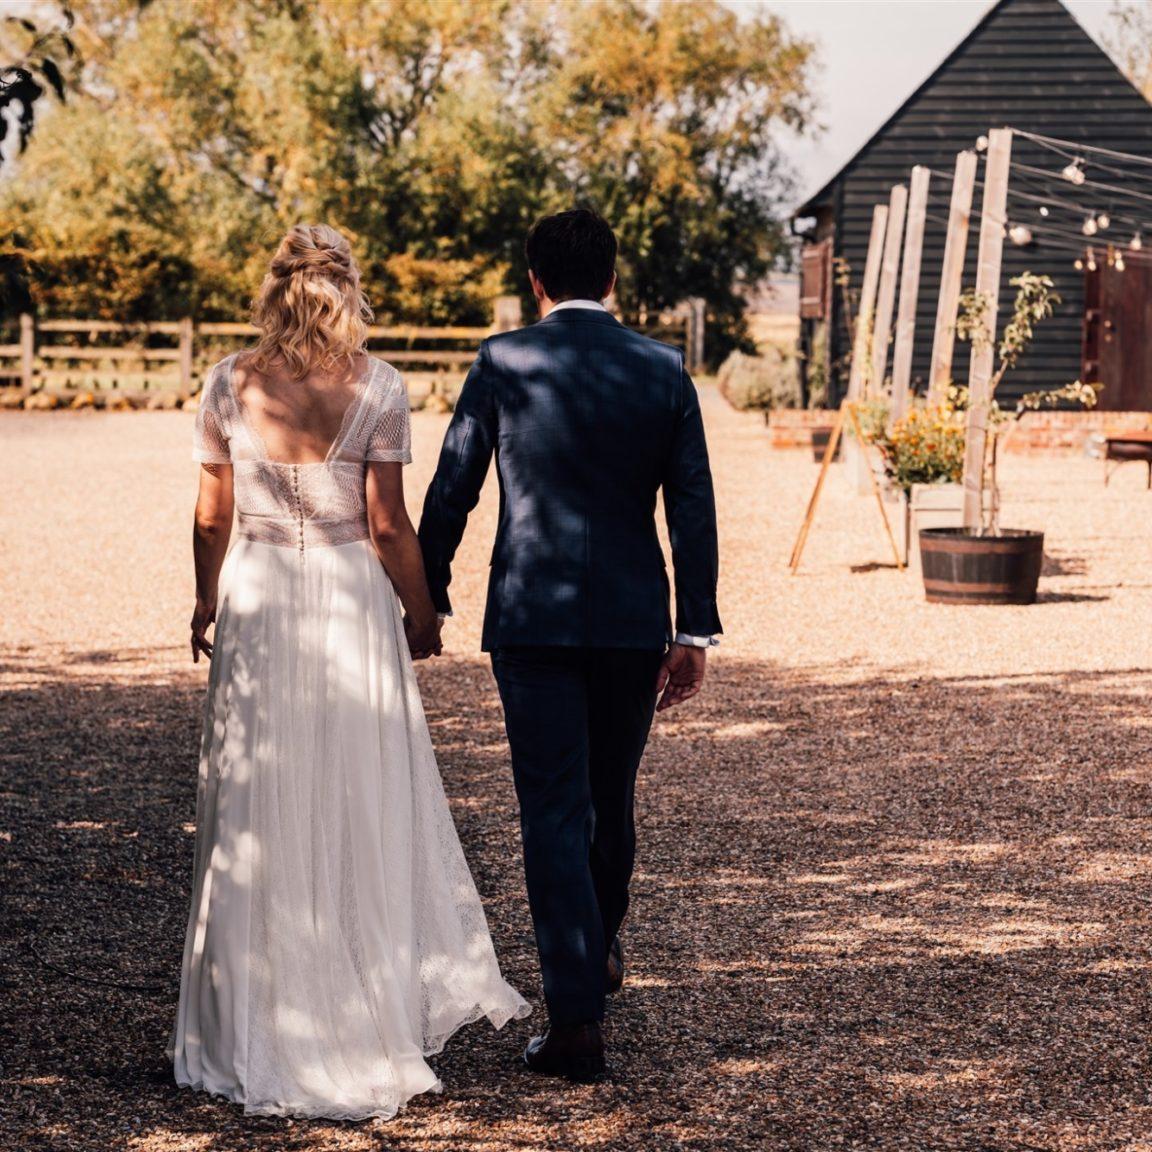 The Farmyard at Elmley is the perfect spot for Woodfired pizzas and music the night before your wedding or for a welcome drink before you ceremony.